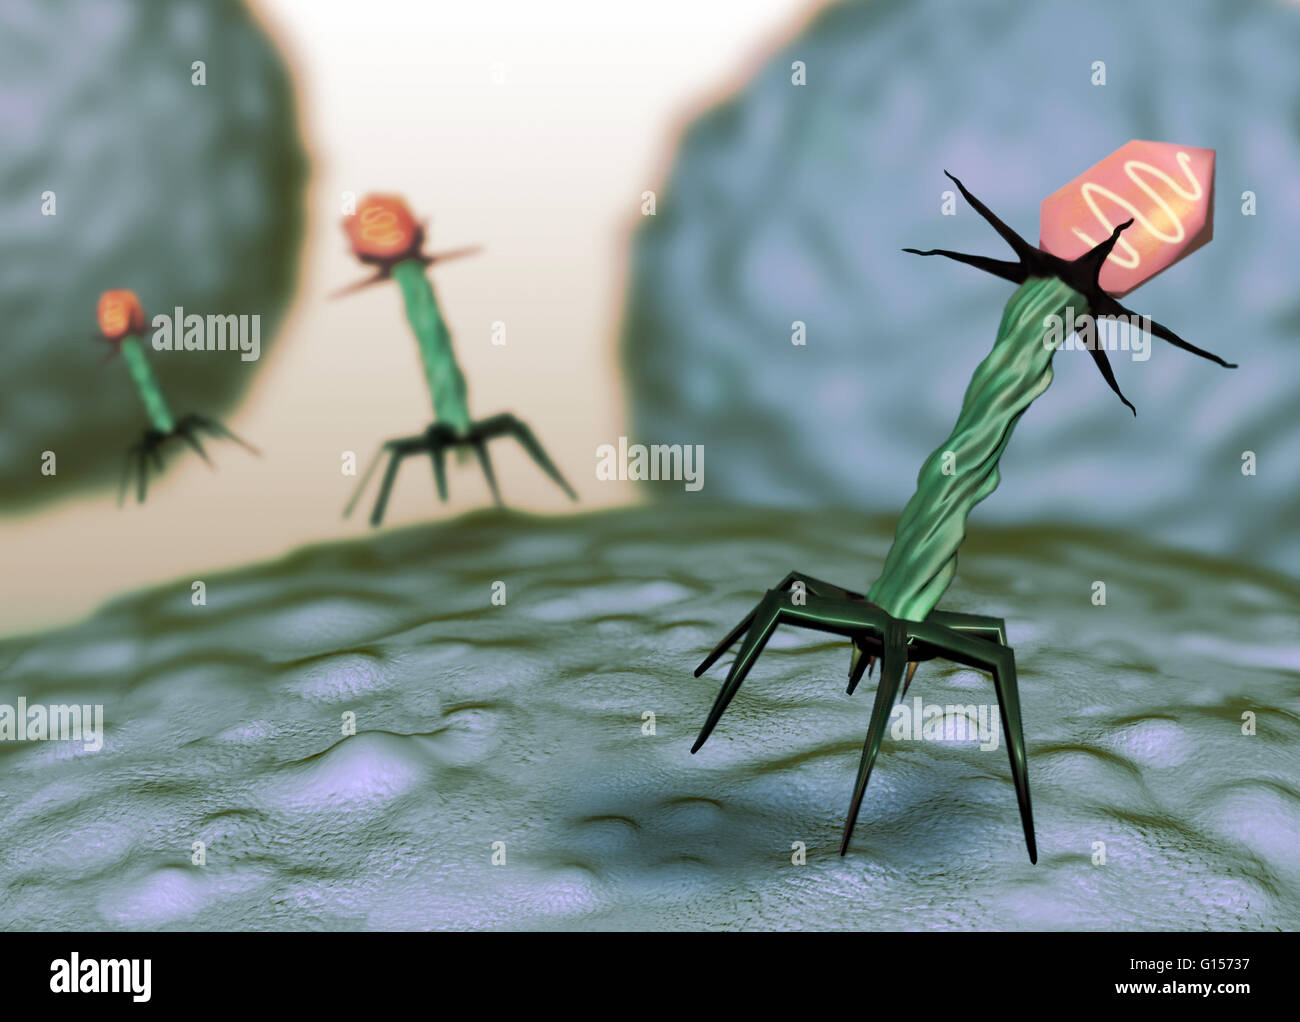 T4 bacteriophage. Computer artwork of a T4 bacteriophage virus. The swollen  structure at top is the head, which contains DNA inside a protein coat.  Attached to this is the tail, consisting of